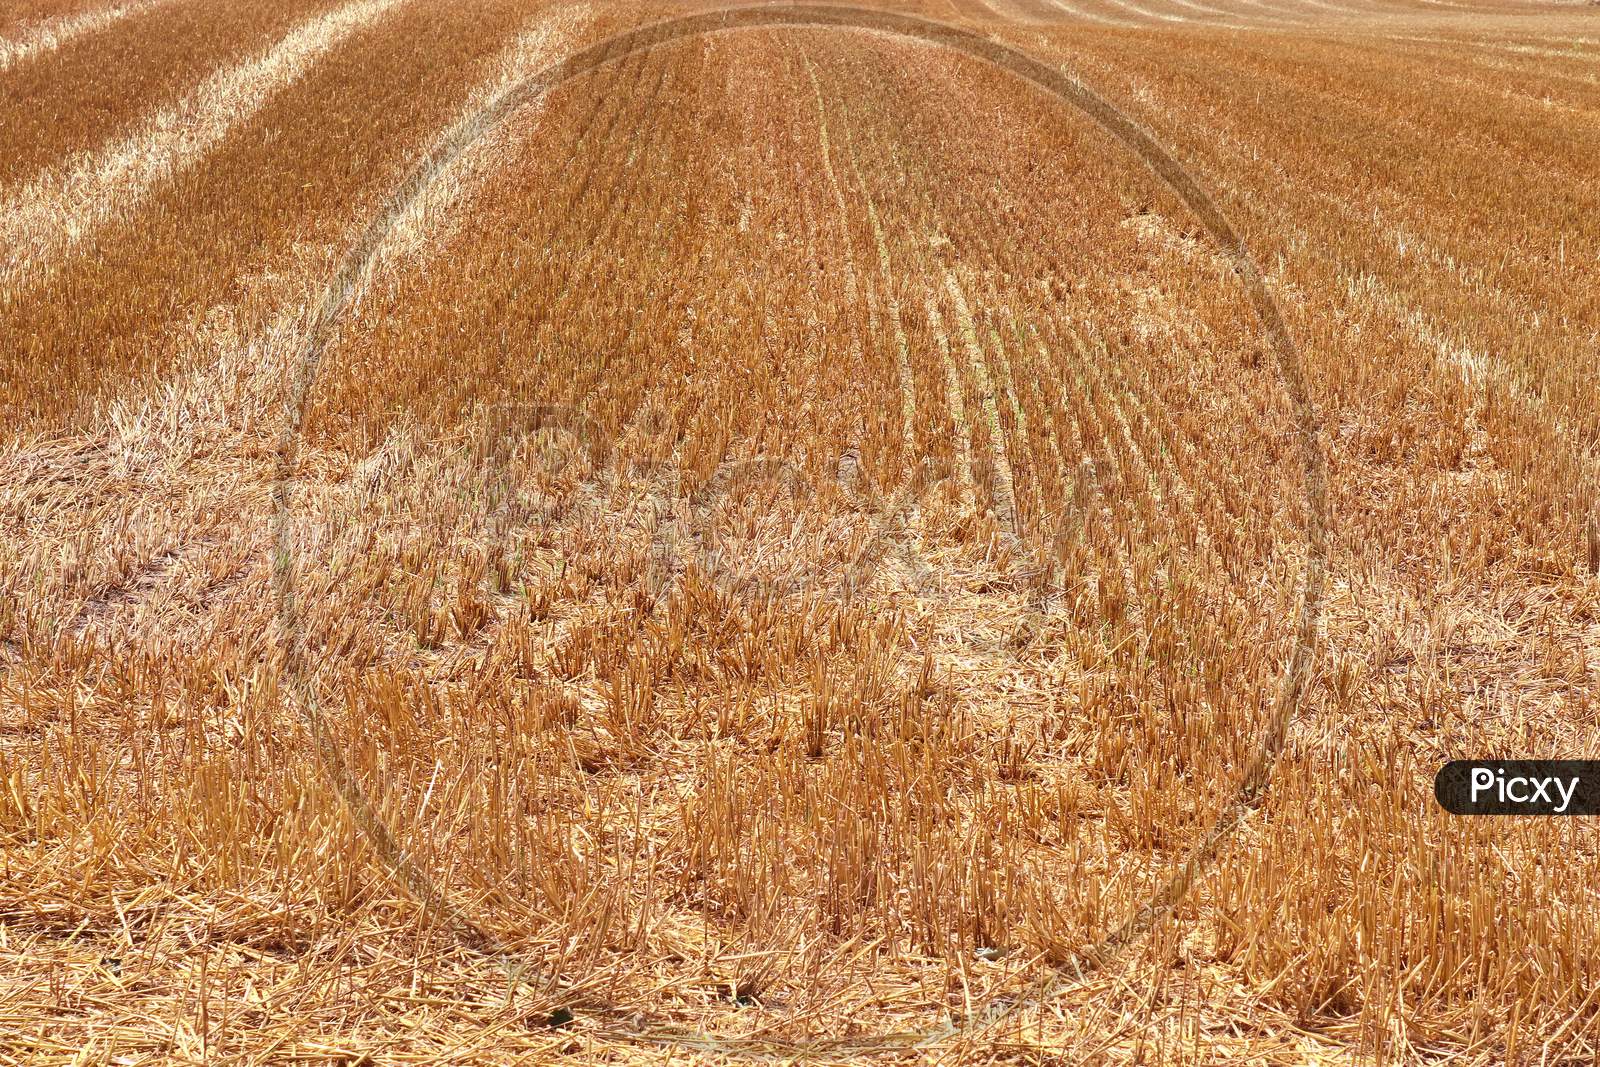 Detailed close up view on agricultural fields with wheat and crop plants ready for harvesting